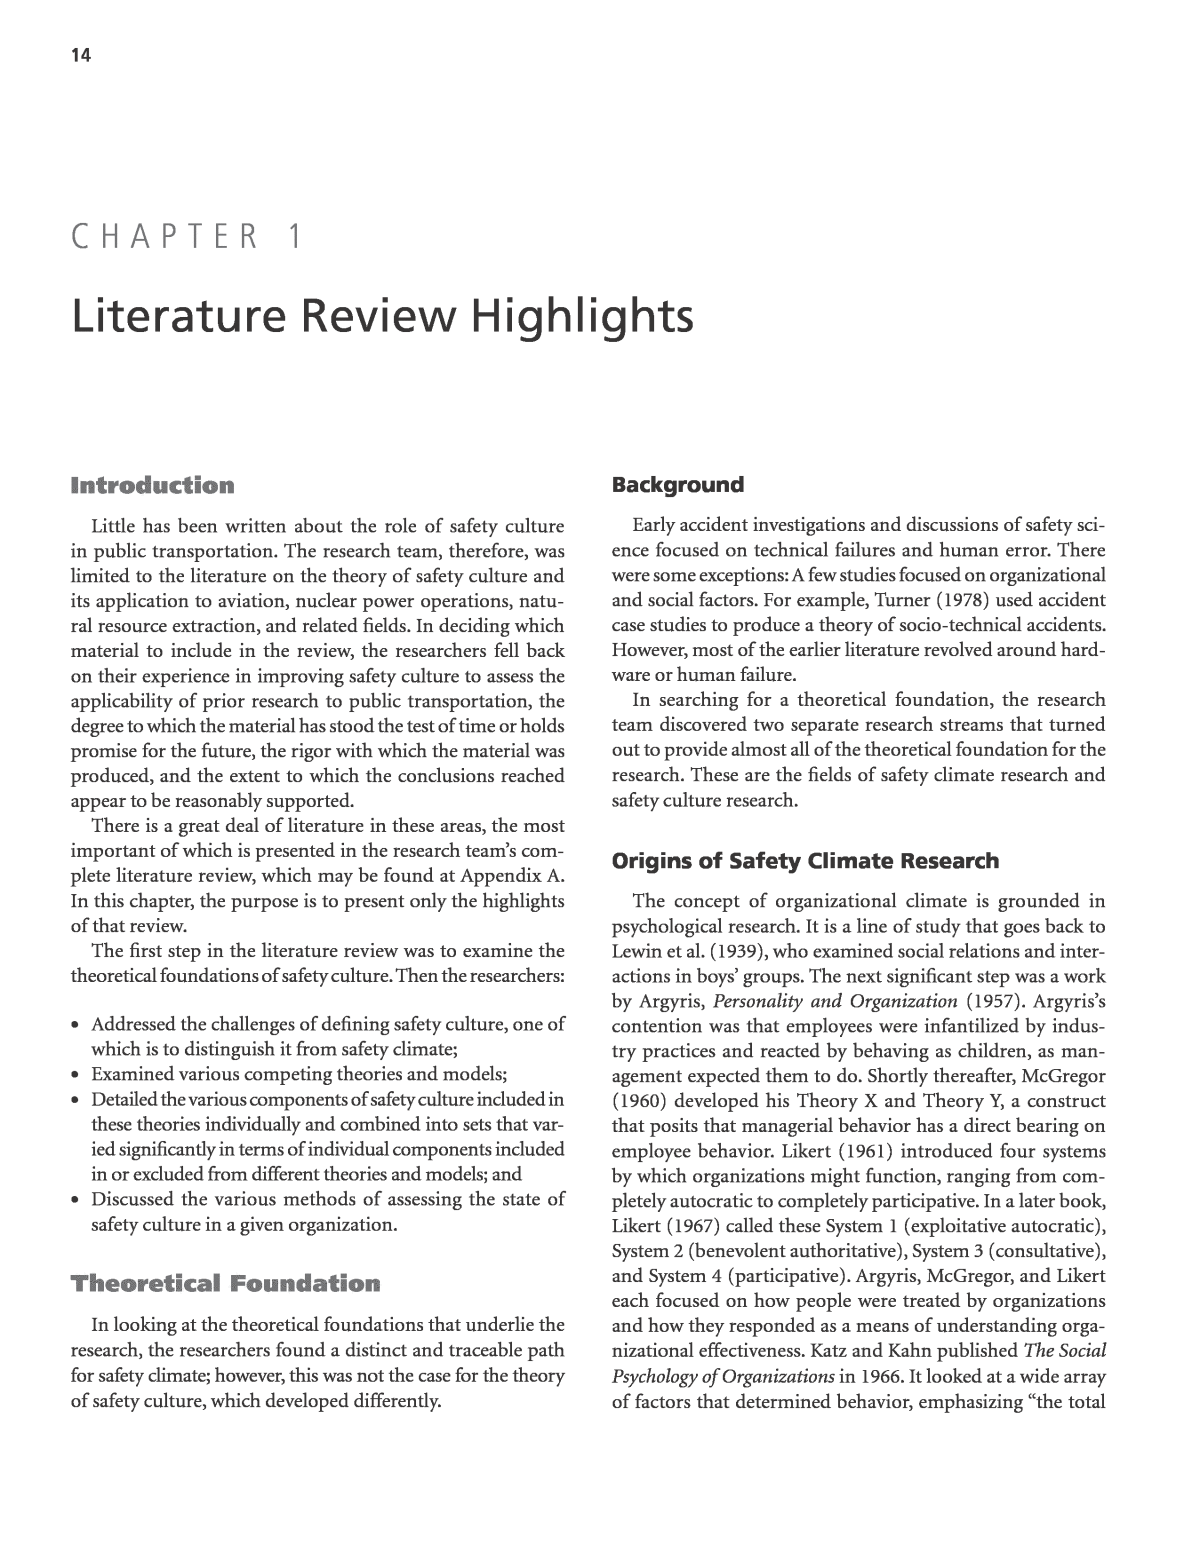 basic literature foundation in research example